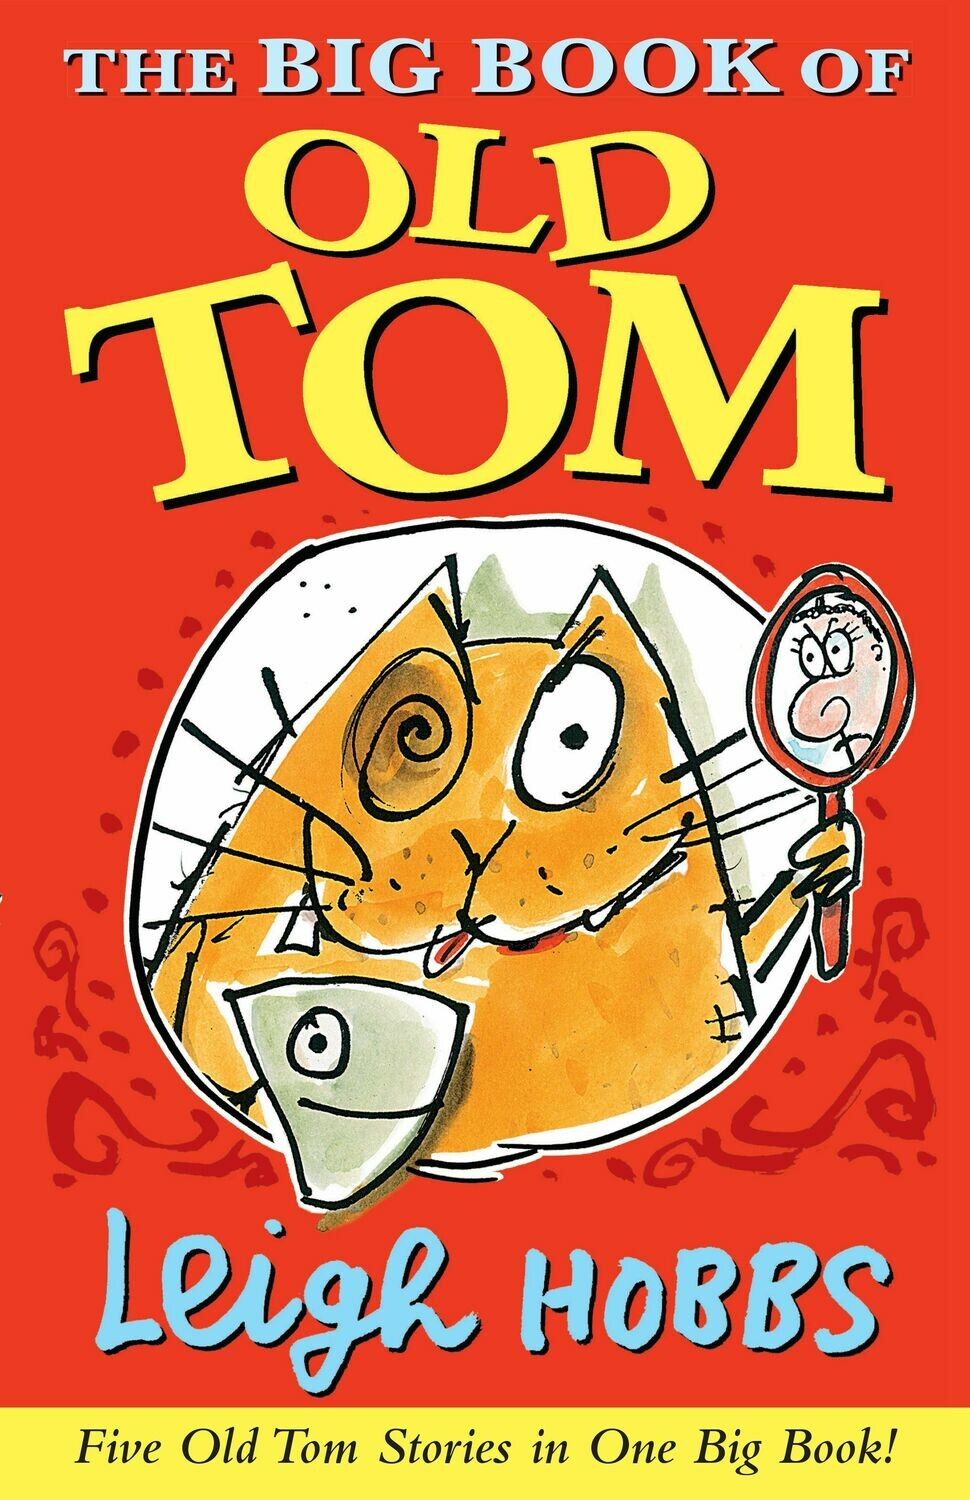 The big book of Old Tom by Leigh Hobbs